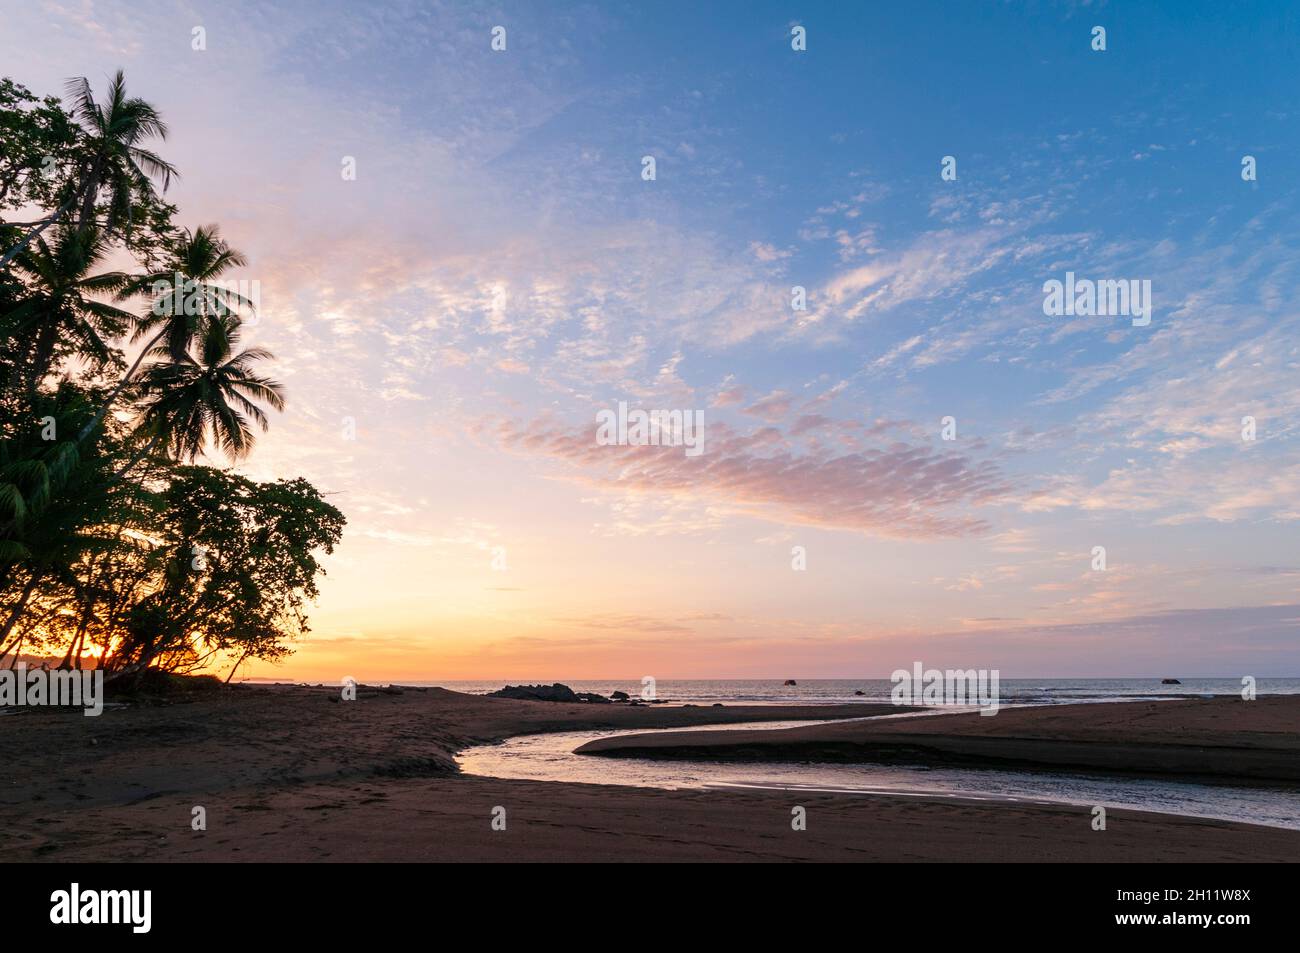 Silhouetted palm trees on a sandy beach at sunset. Drake Bay, Osa Peninsula, Costa Rica. Stock Photo